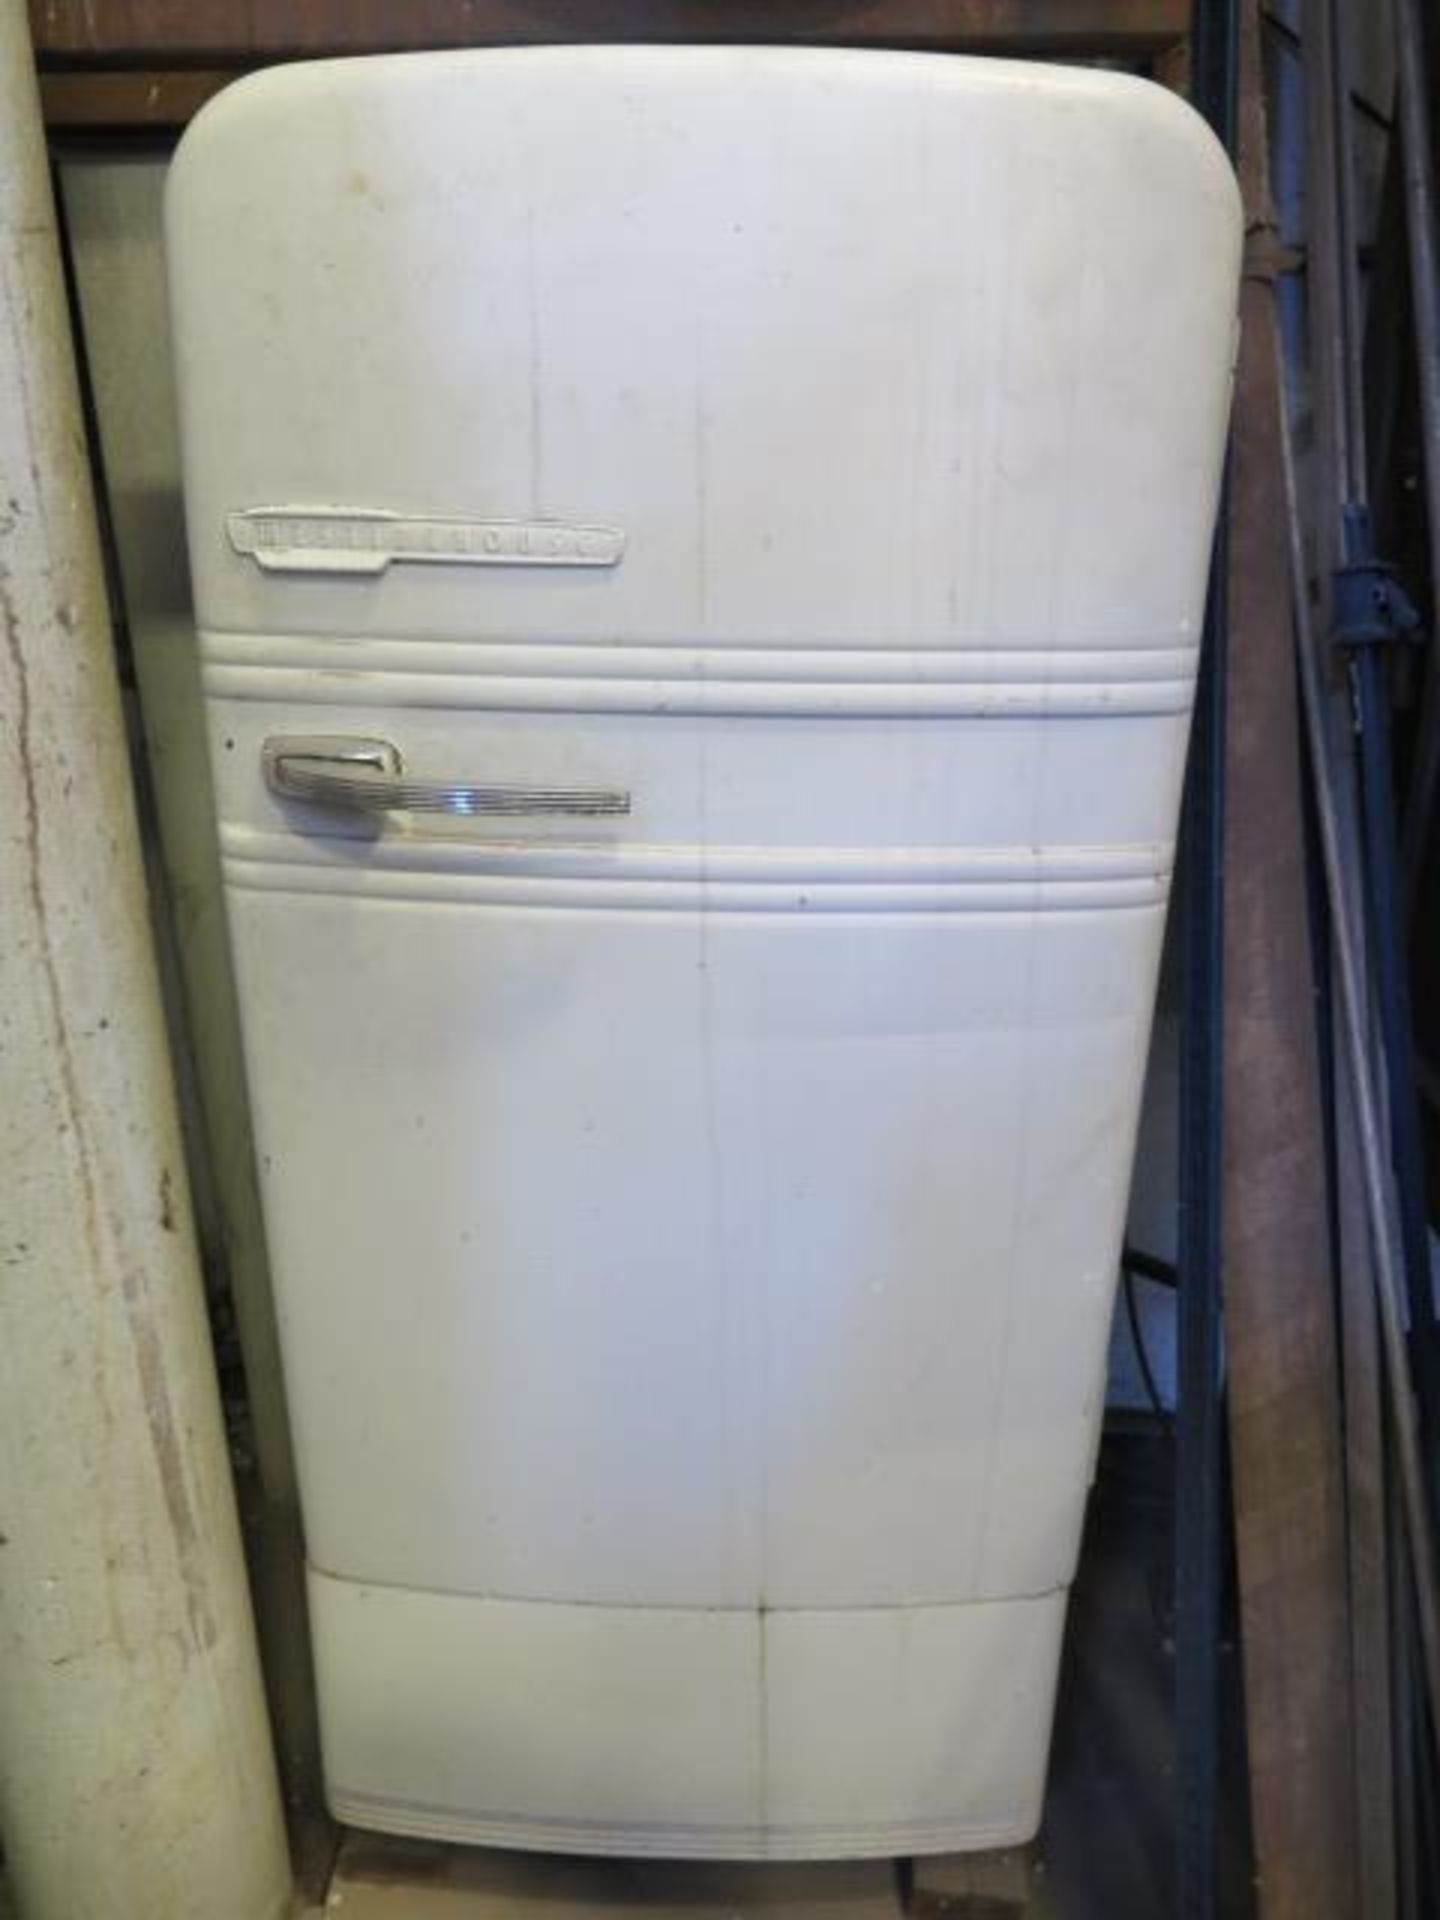 Dry-Rod Electrode Stabilization Oven and Converted Refrigerstor (SOLD AS-IS - NO WARRANTY) - Image 2 of 7